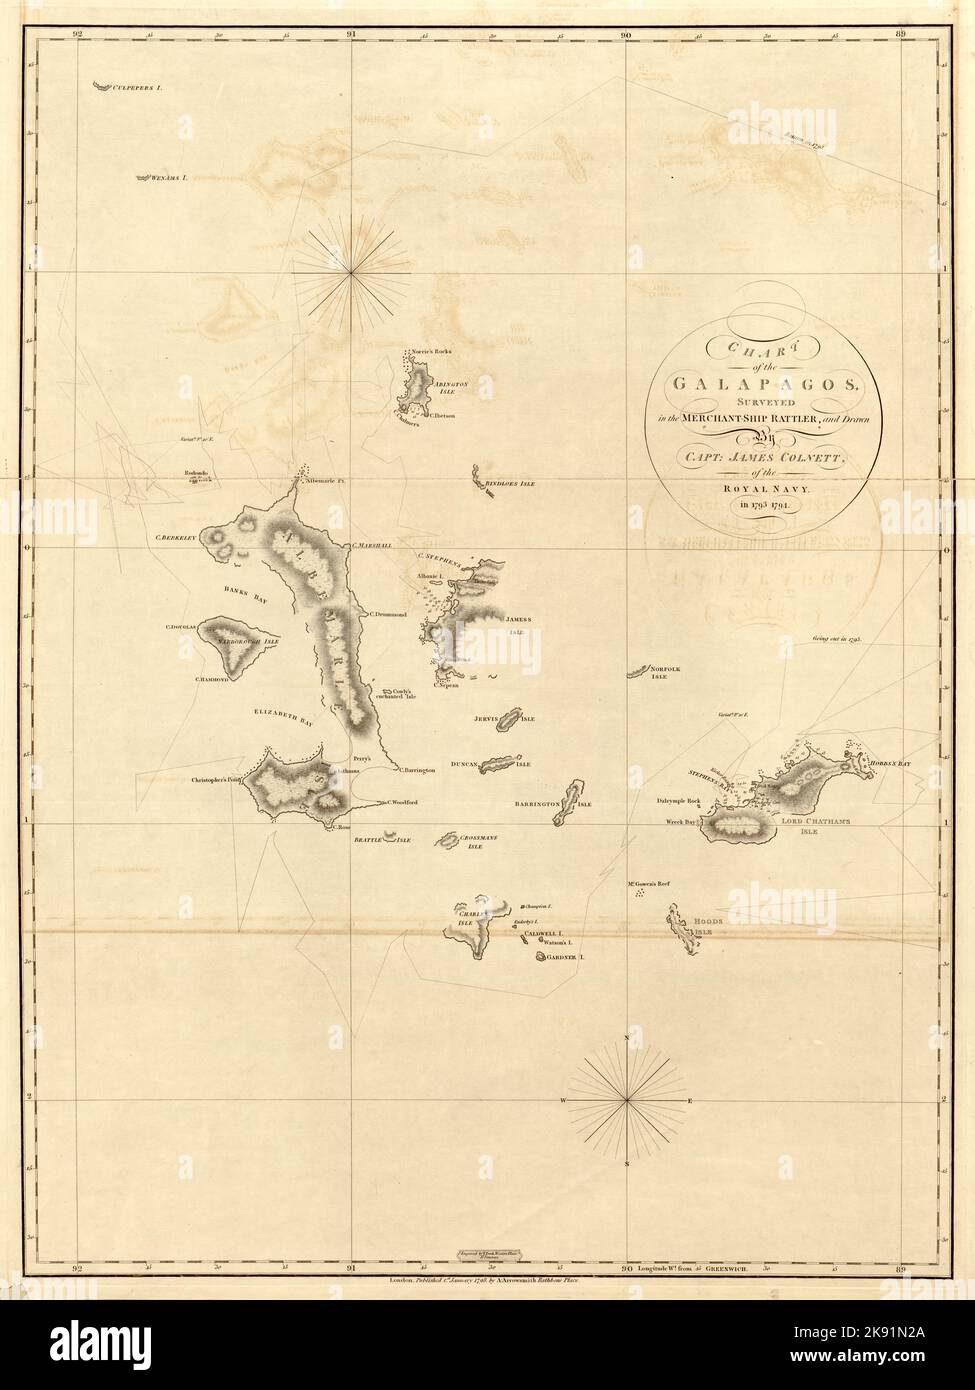 Vintage chart map of the Galapagos Islands, Ecuador, ca.1798  by Captain James Colnett of the Royal Navy who undertook a survey in 1793 of the Galapagos in the merchant ship Rattler Stock Photo